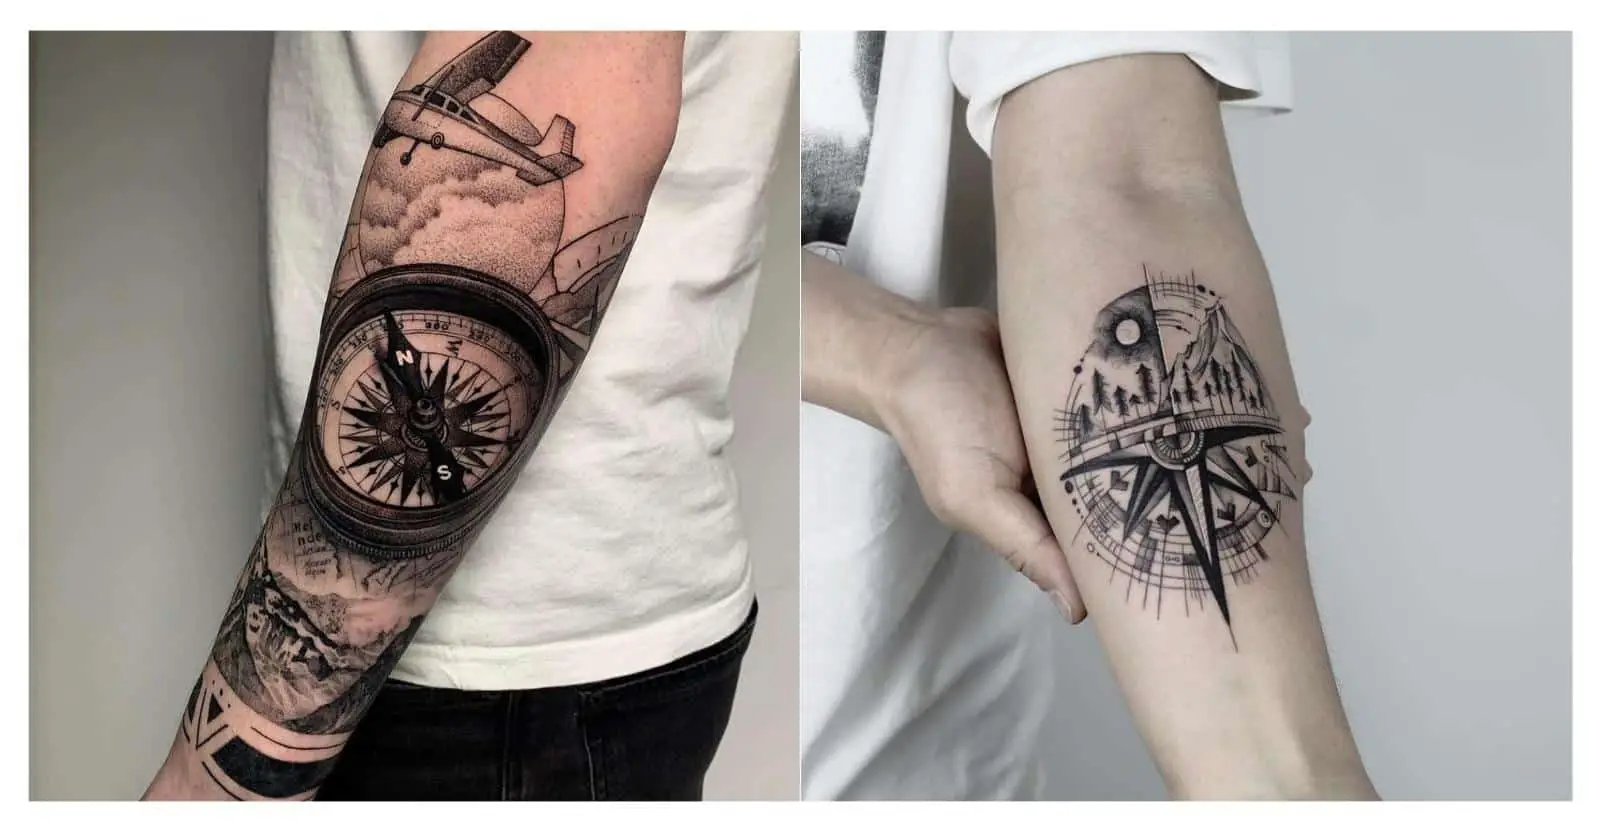 Tattoo custom designed by artist based off of inspo and a few other pics  she pulled off of google. I love it. : r/TattooDesigns